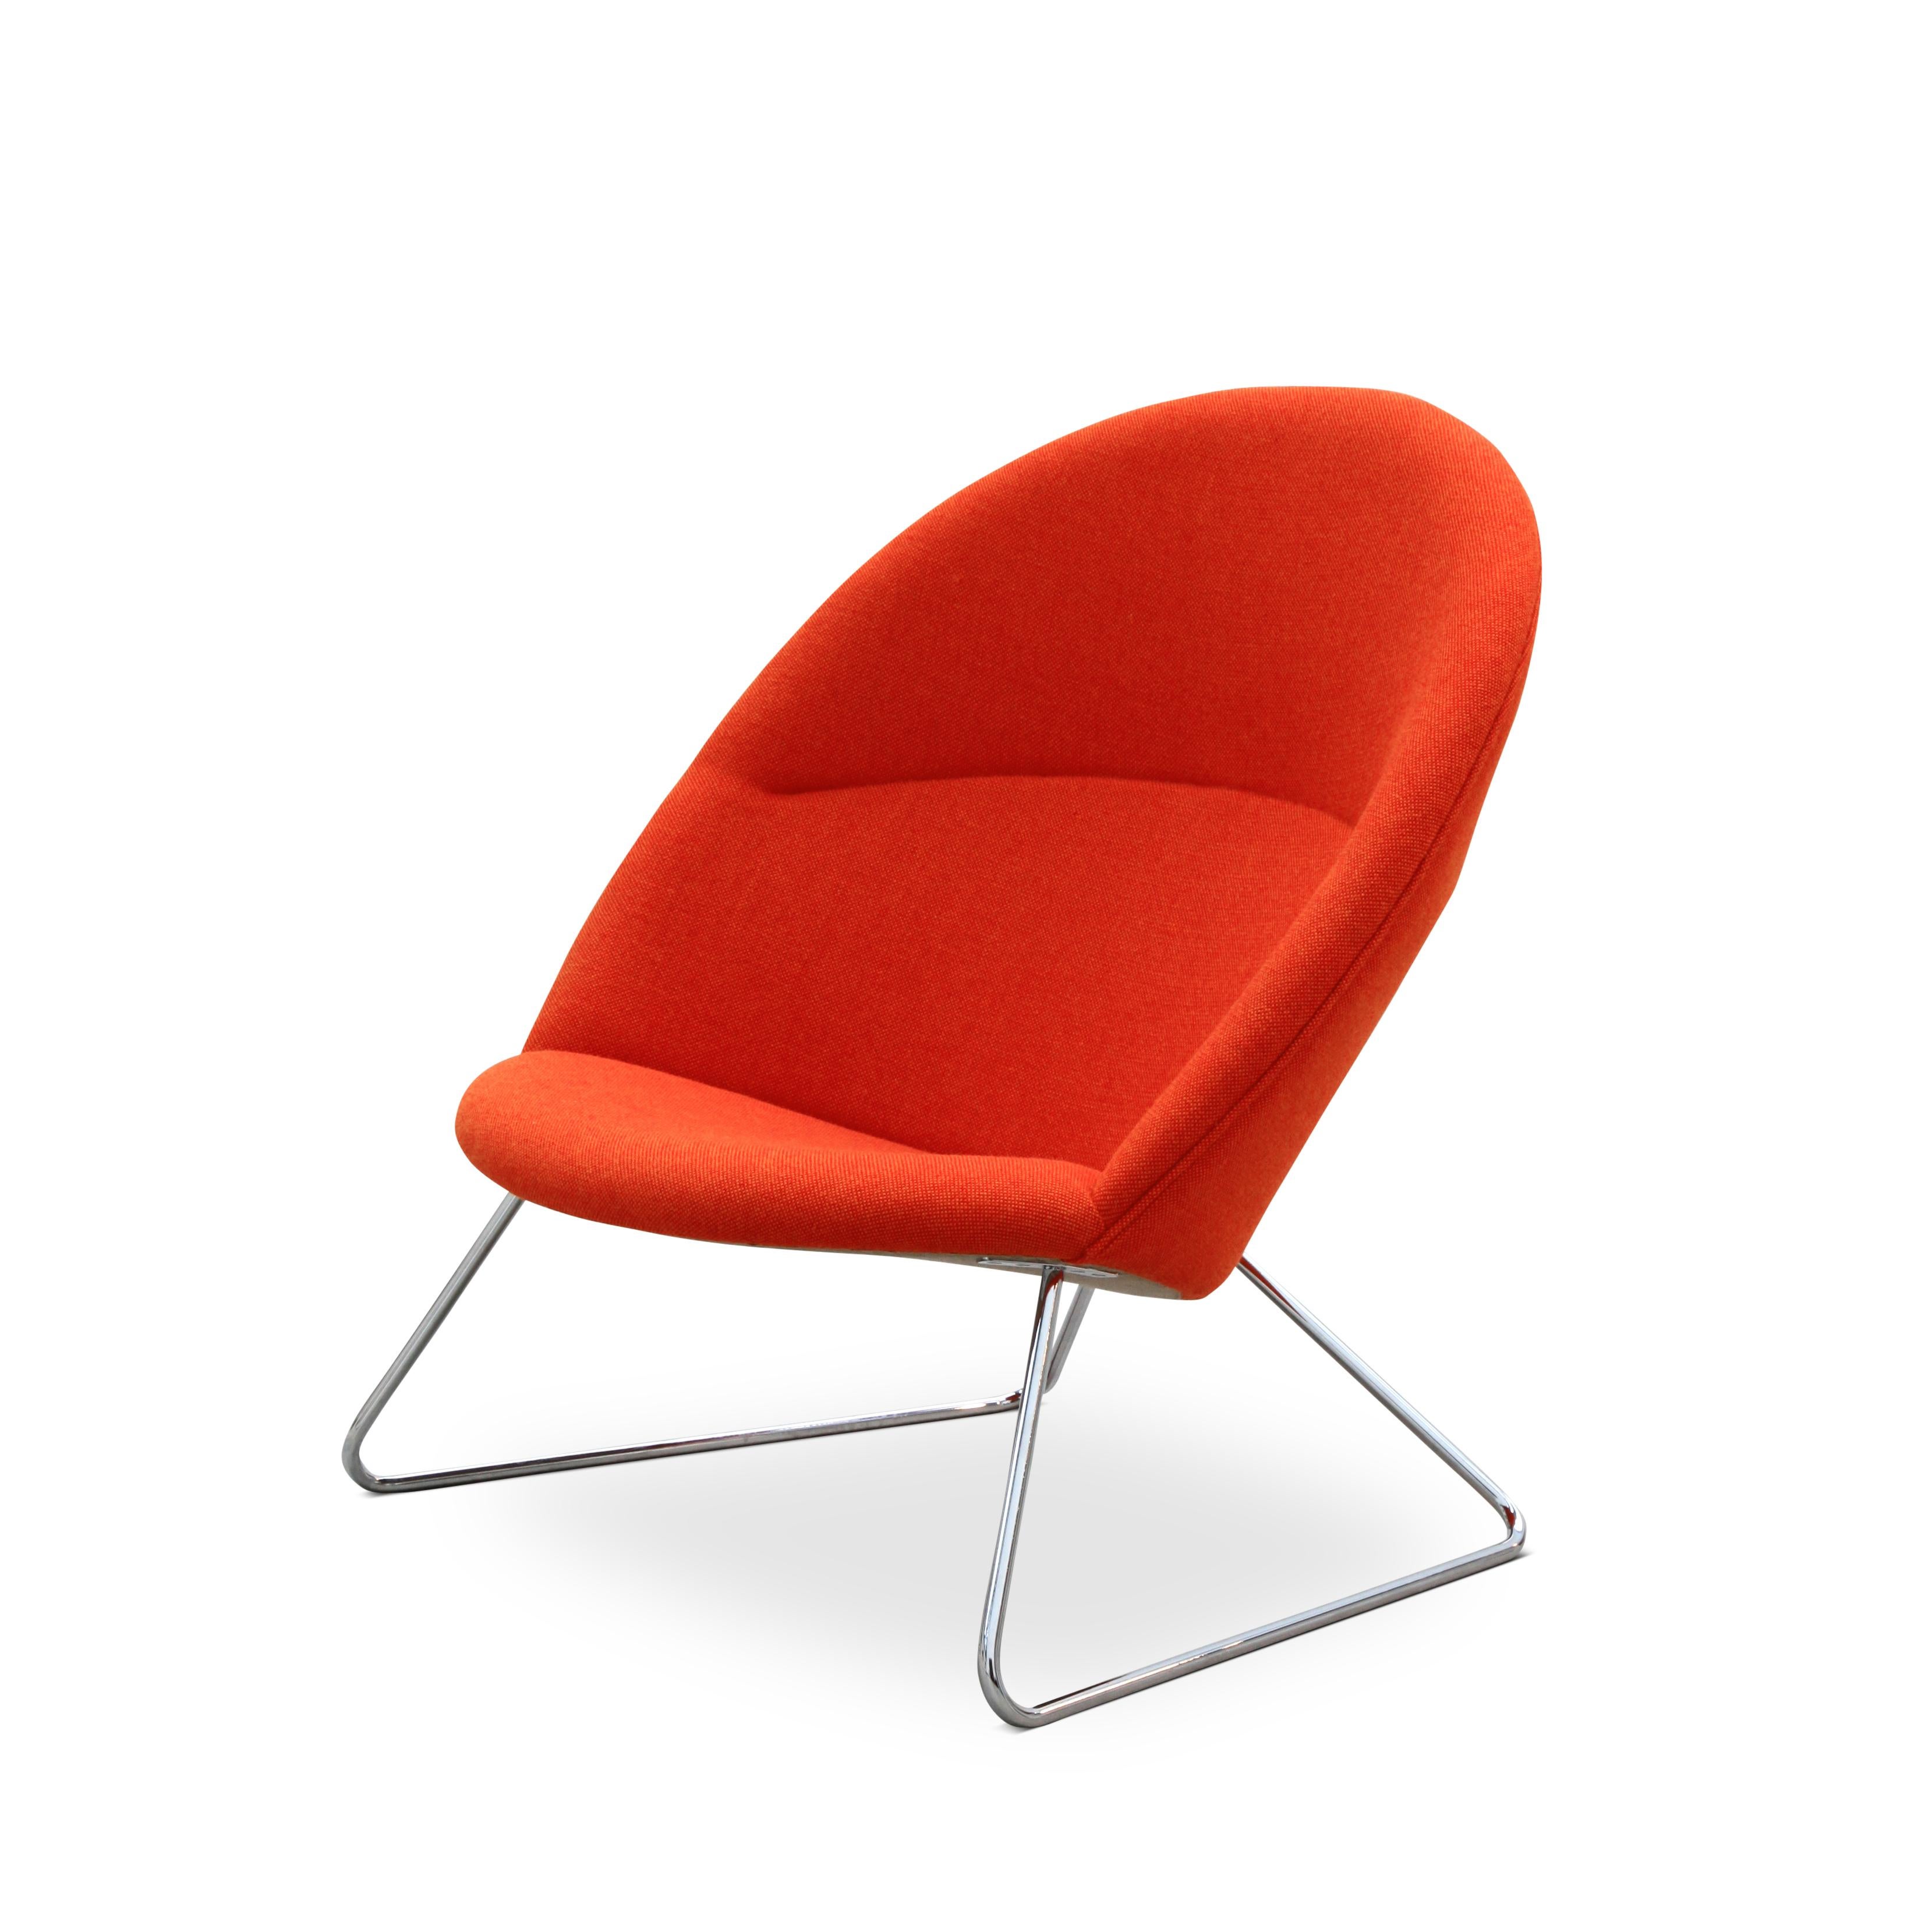 Contemporary Nanna Ditzel & Jørgen Ditzel, Red Dennie Chair by One Collection